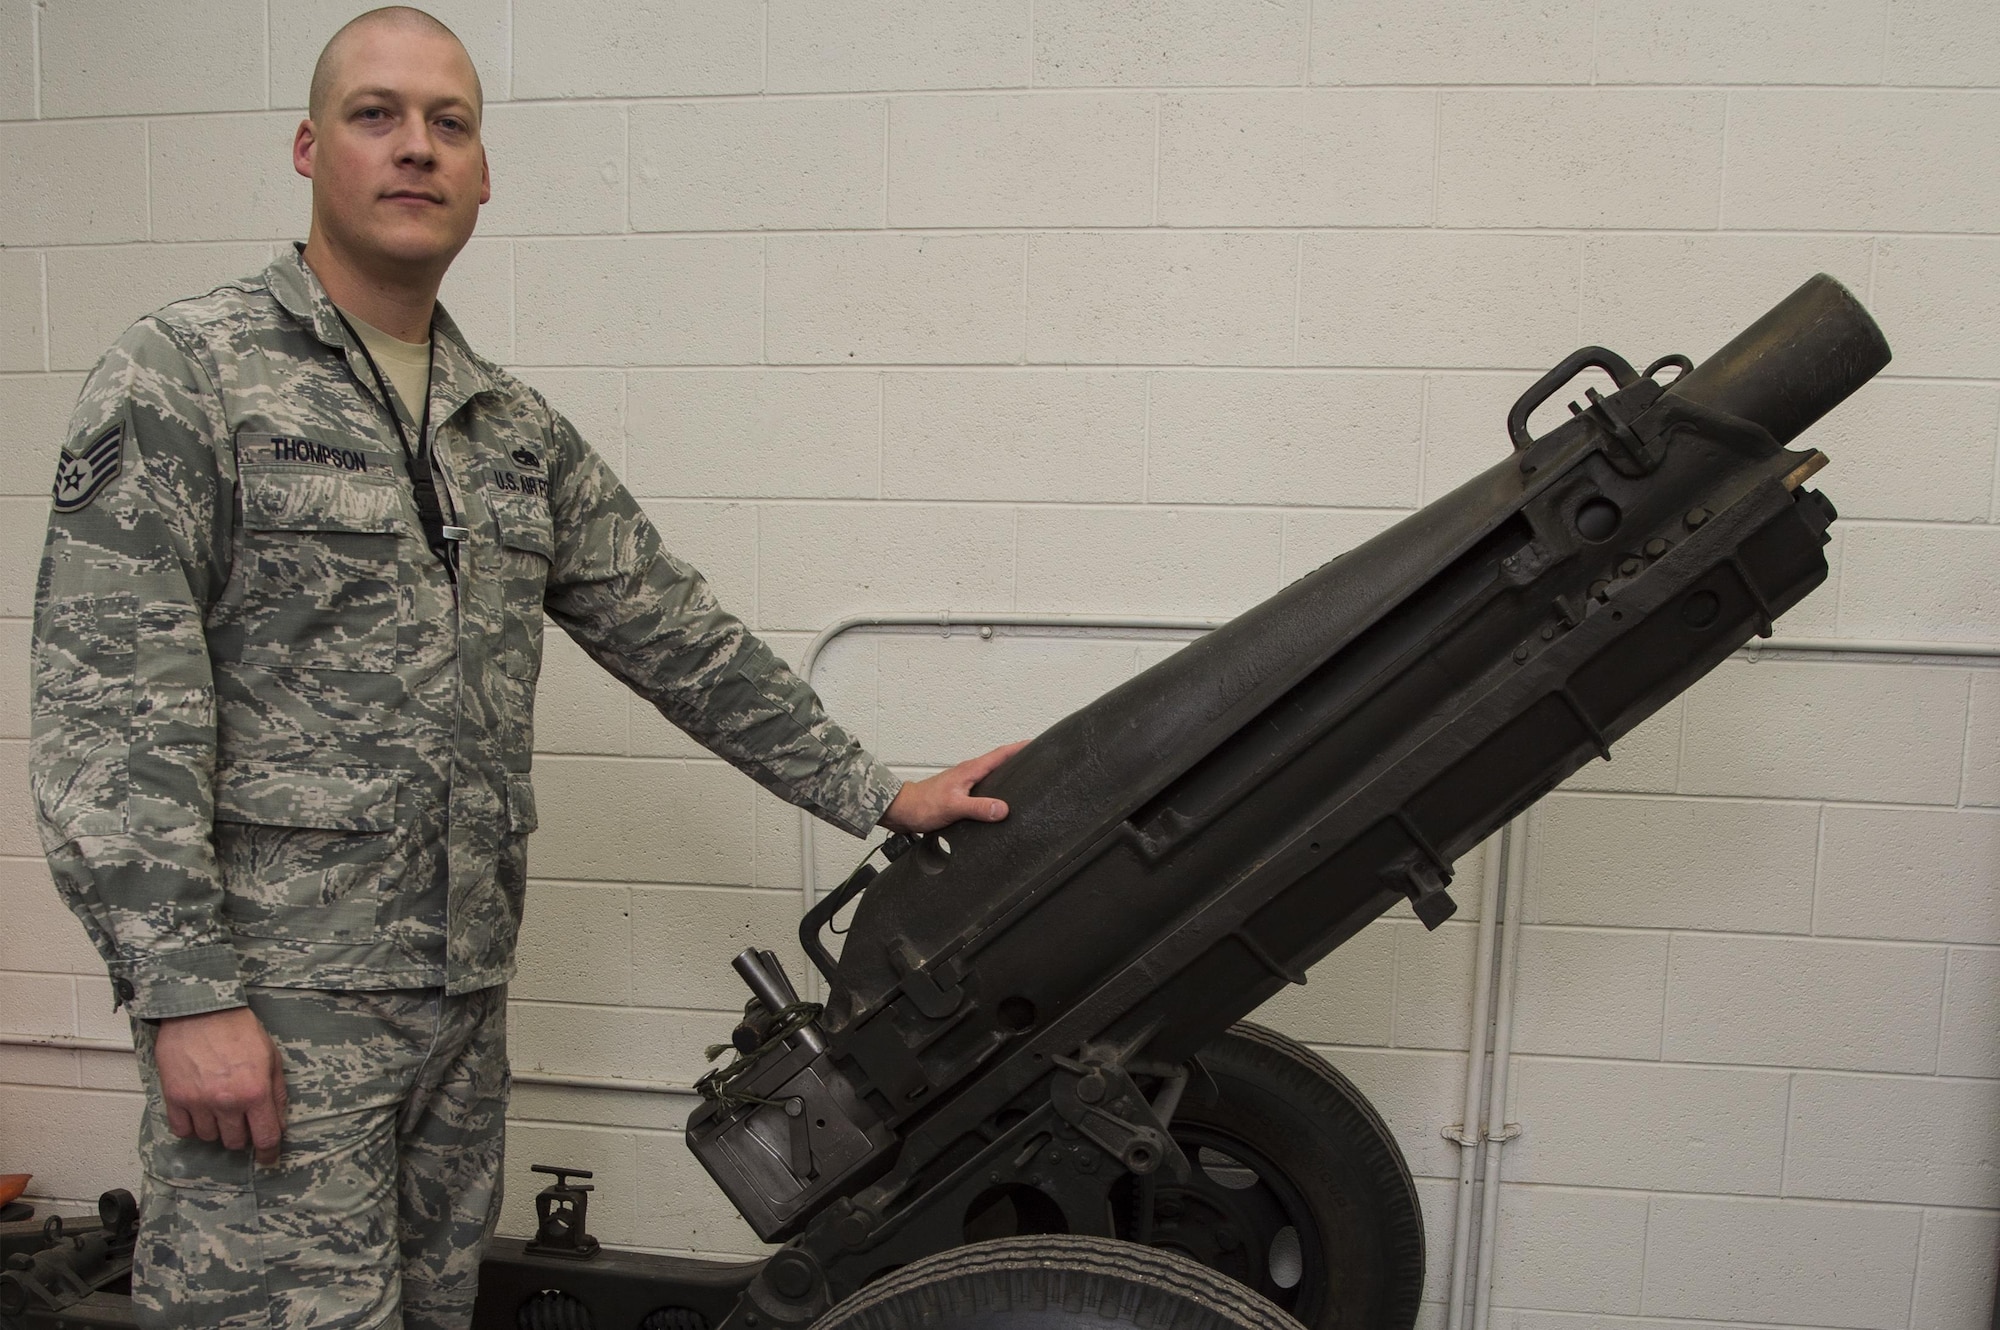 Staff Sgt. Bryan Thompson, 90th Munition Squadron munitions operations NCO in charge, stands beside a M1 Pack Howitzer artillery cannon at F.E. Warren Air Force Base, Wyo., Oct. 31, 2016. This is the last remaining active duty Air Force artillery cannon still in use today for official ceremonies on the base. The 90th MUNS mission is to enable nuclear deterrence by maintaining combat ready munitions in defense of global freedoms safely, securely and effectively. (U.S. Air Force photo by Staff Sgt. Christopher Ruano) 